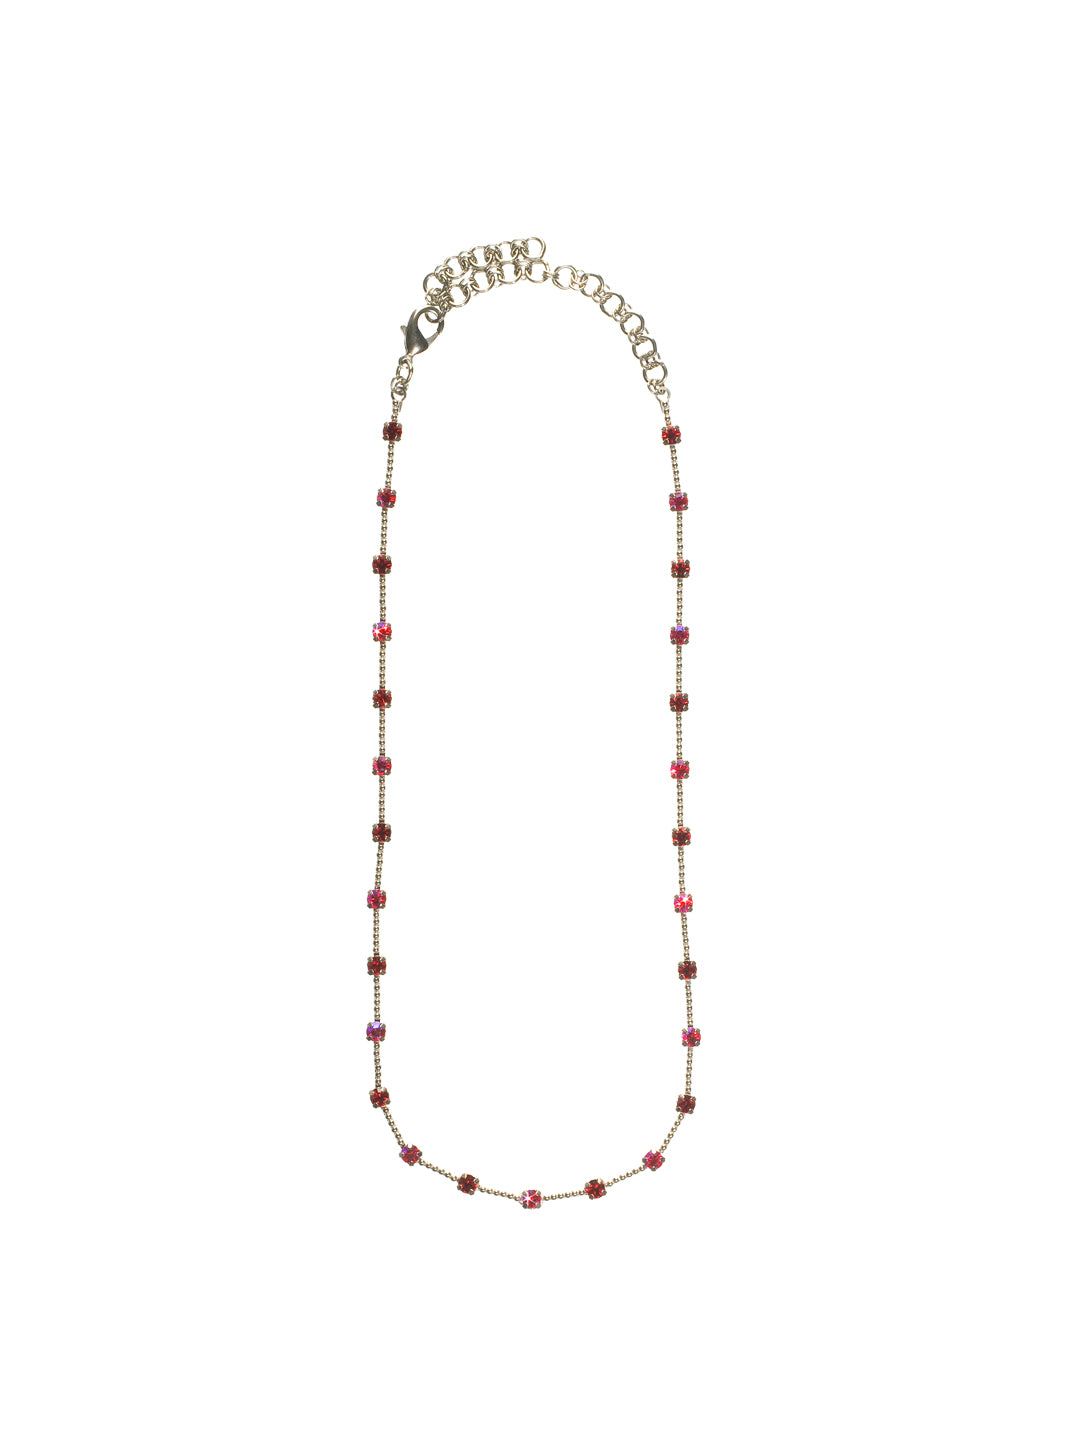 Classic Necklace with Alternating Crystals and Ball Chain Detail - NBZ28ASCB